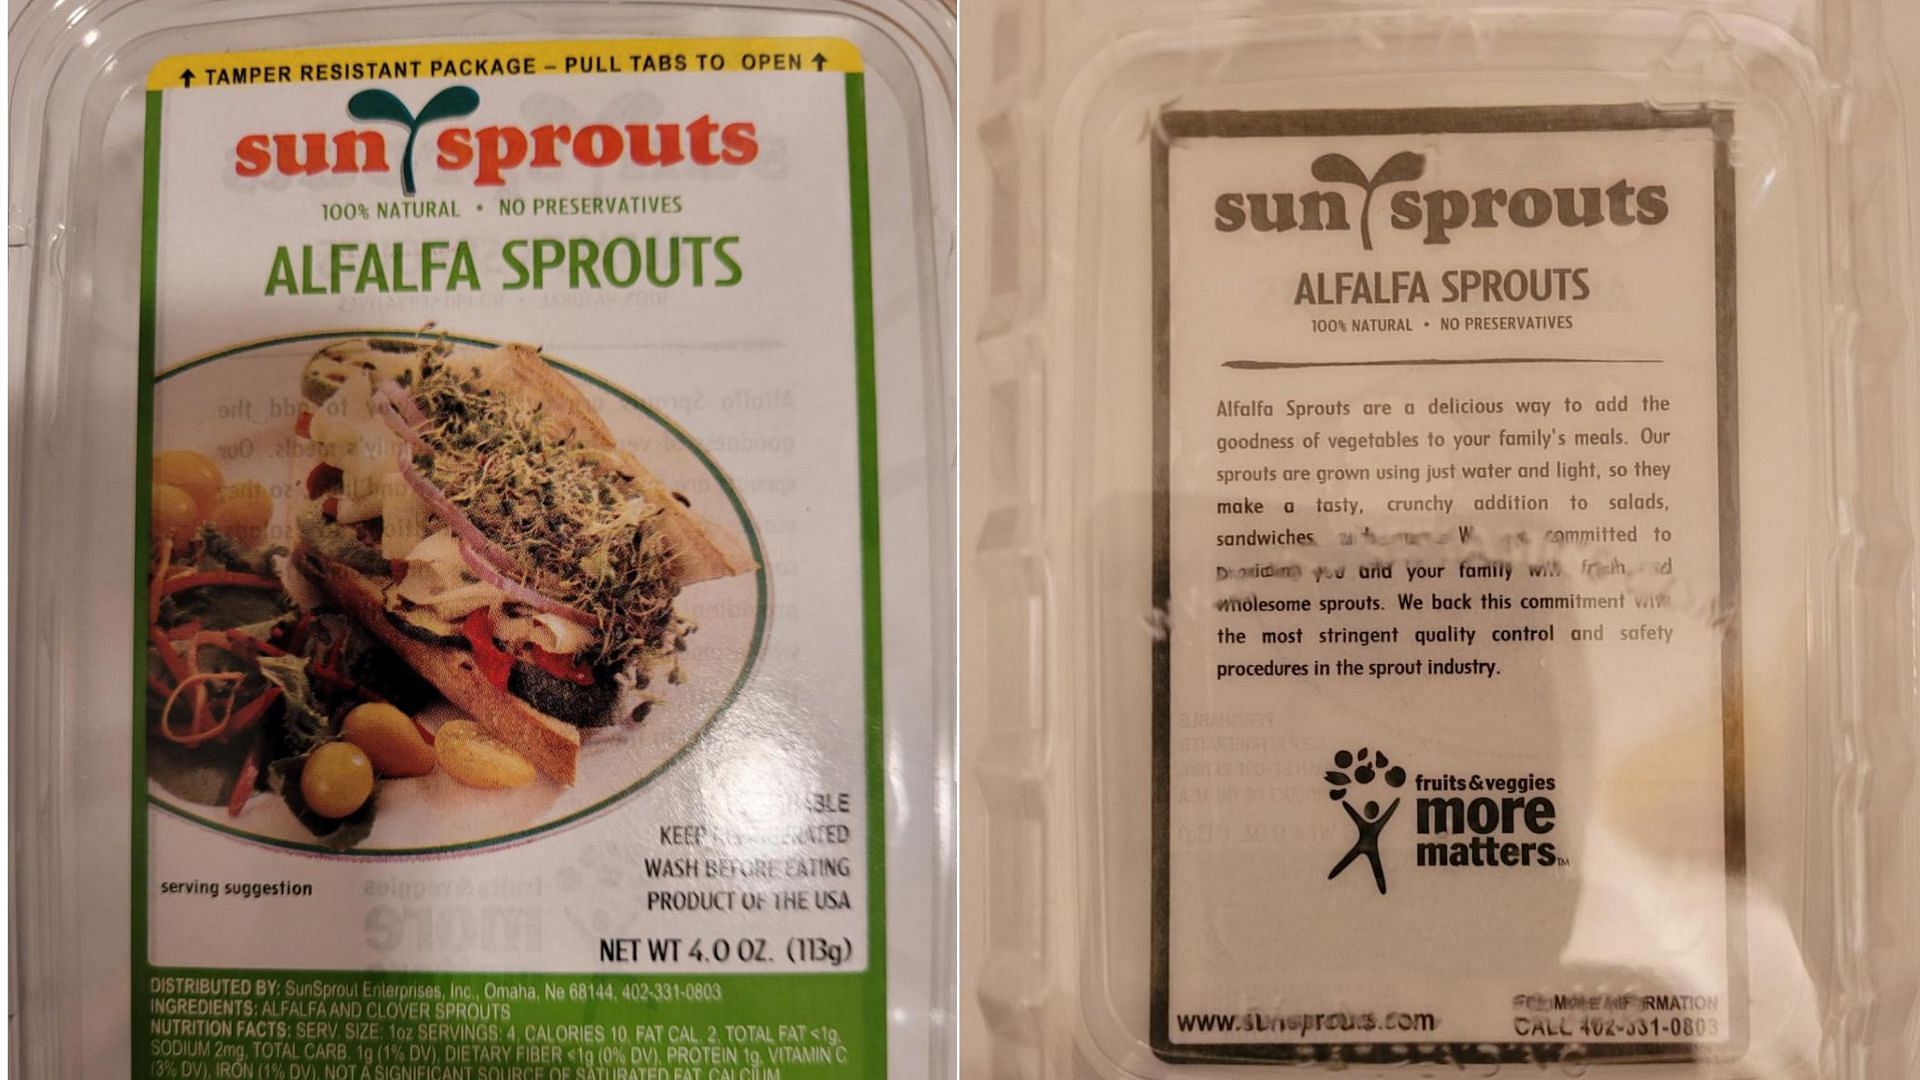 raw sprouts package from SunSprouts Alfafa Sprouts Recall (Image via FDA)